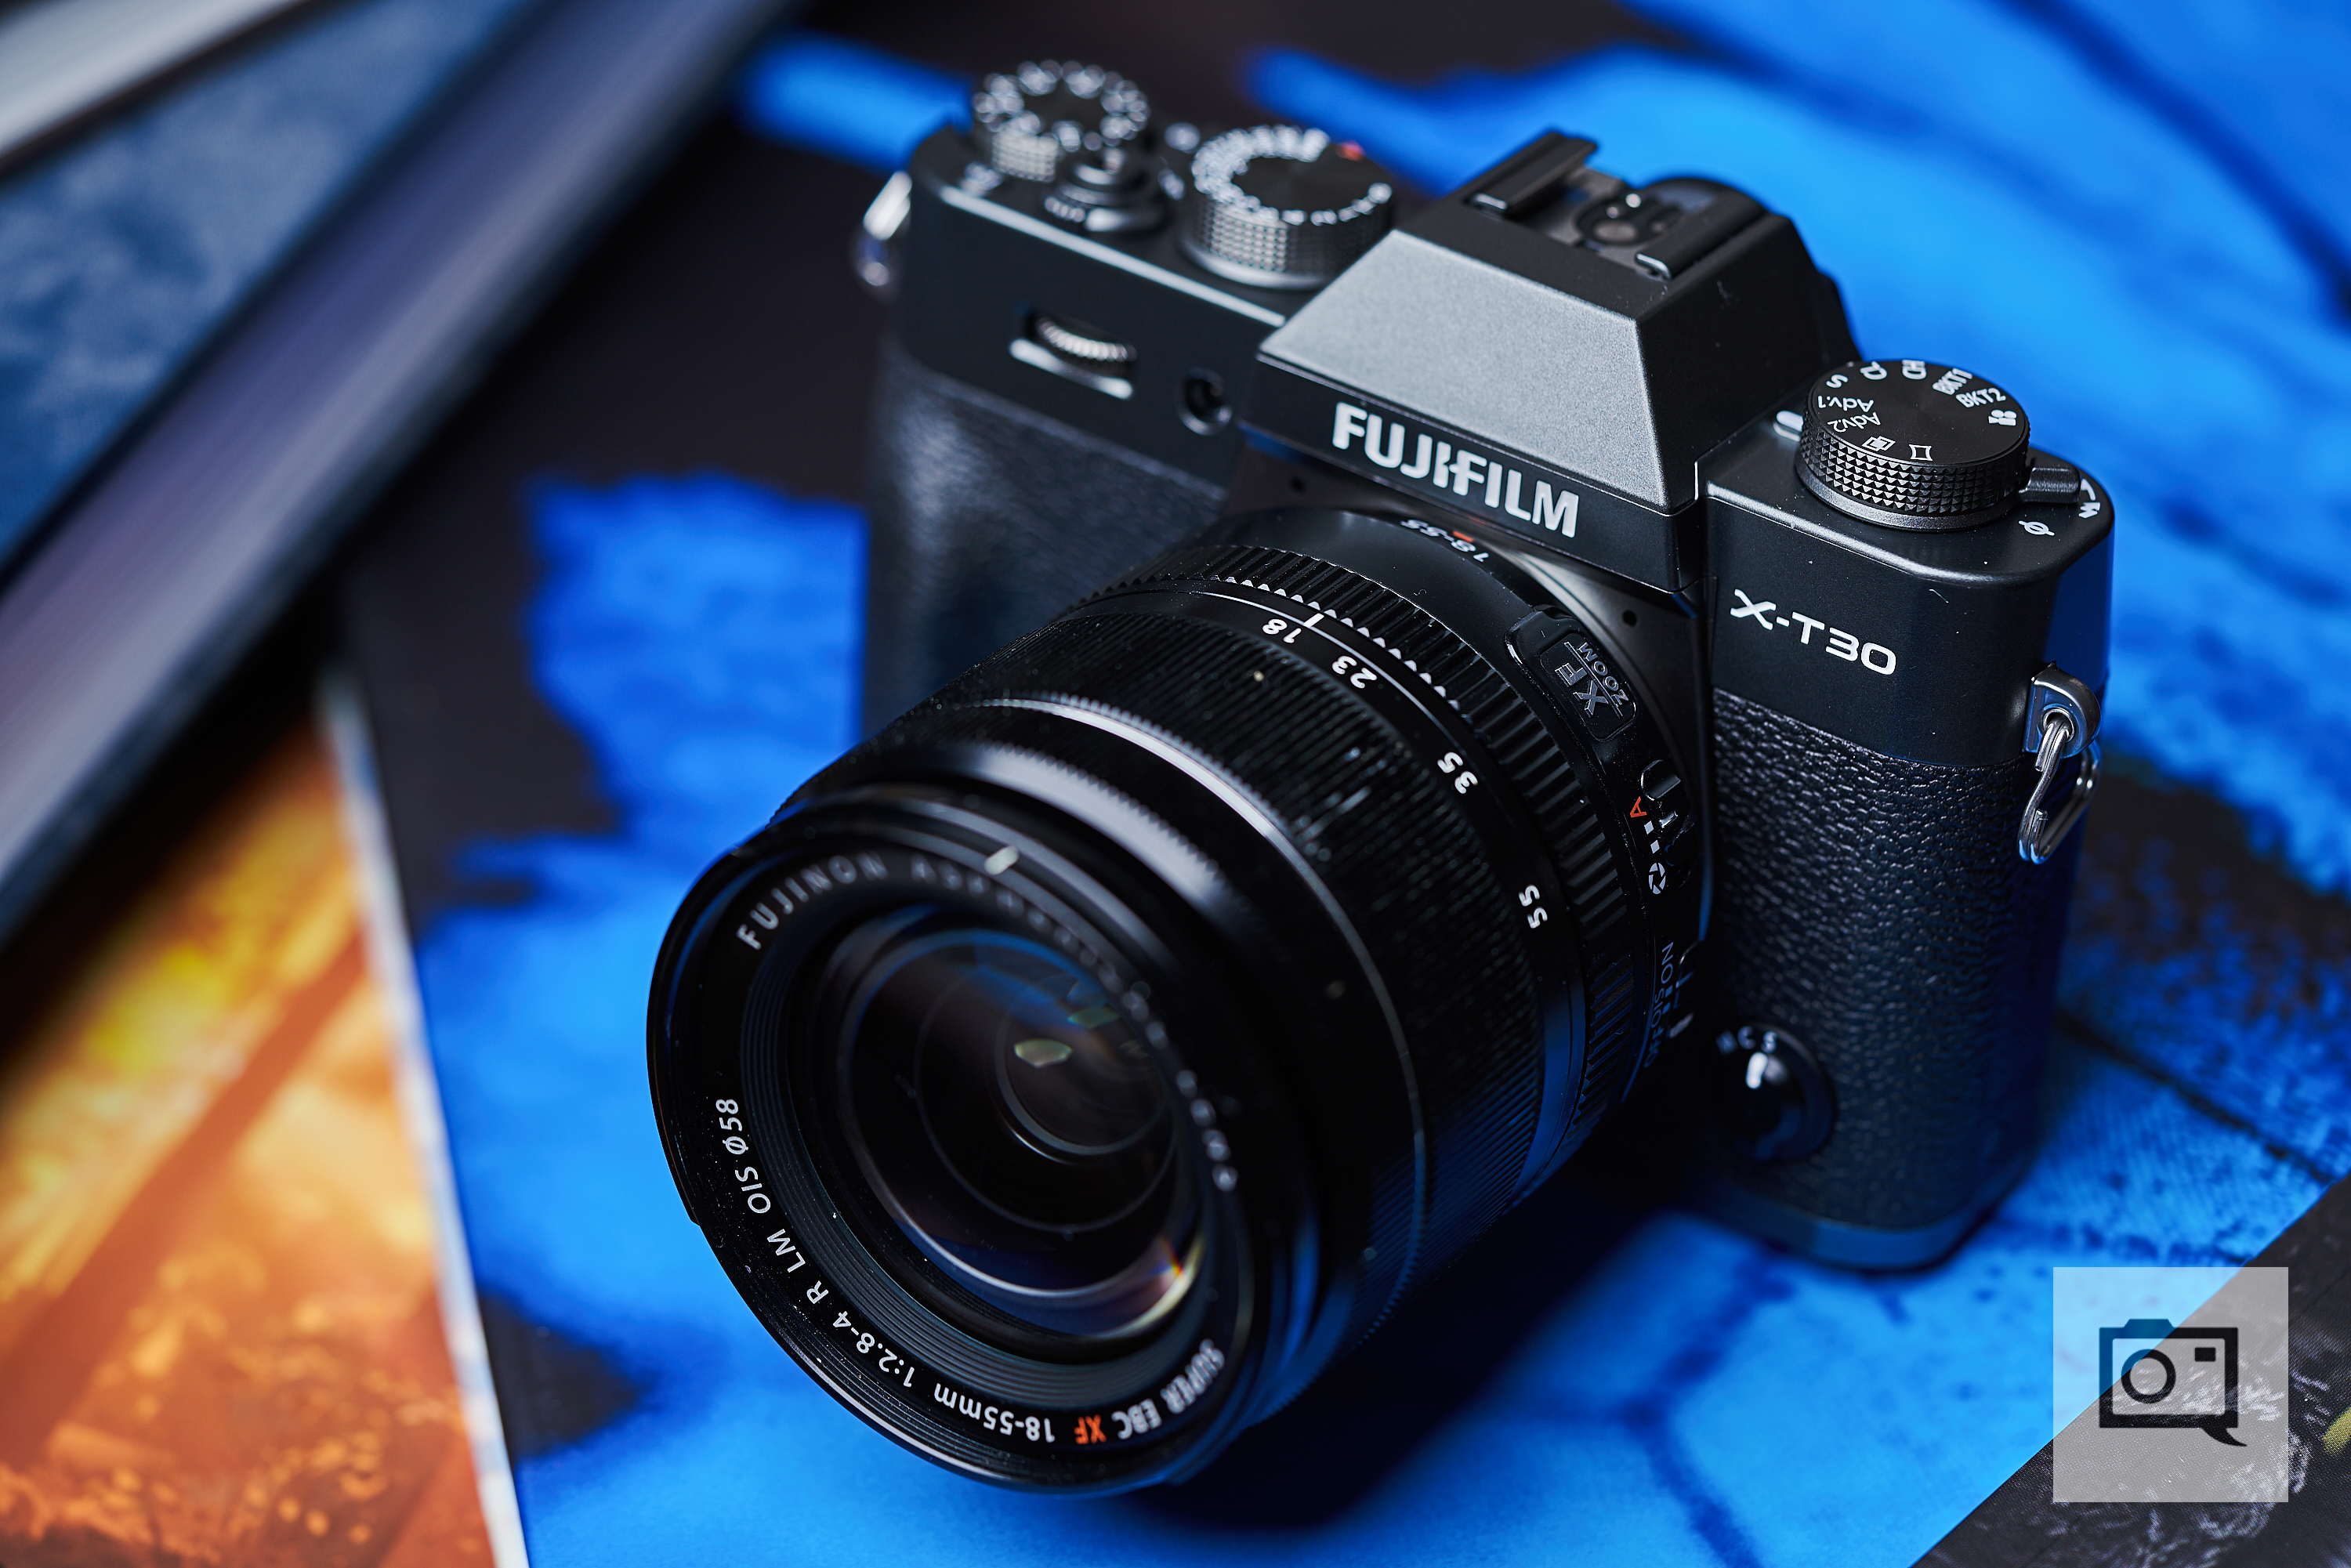 First Fujifilm X-T30 (Look What They Did to the JoyStick)